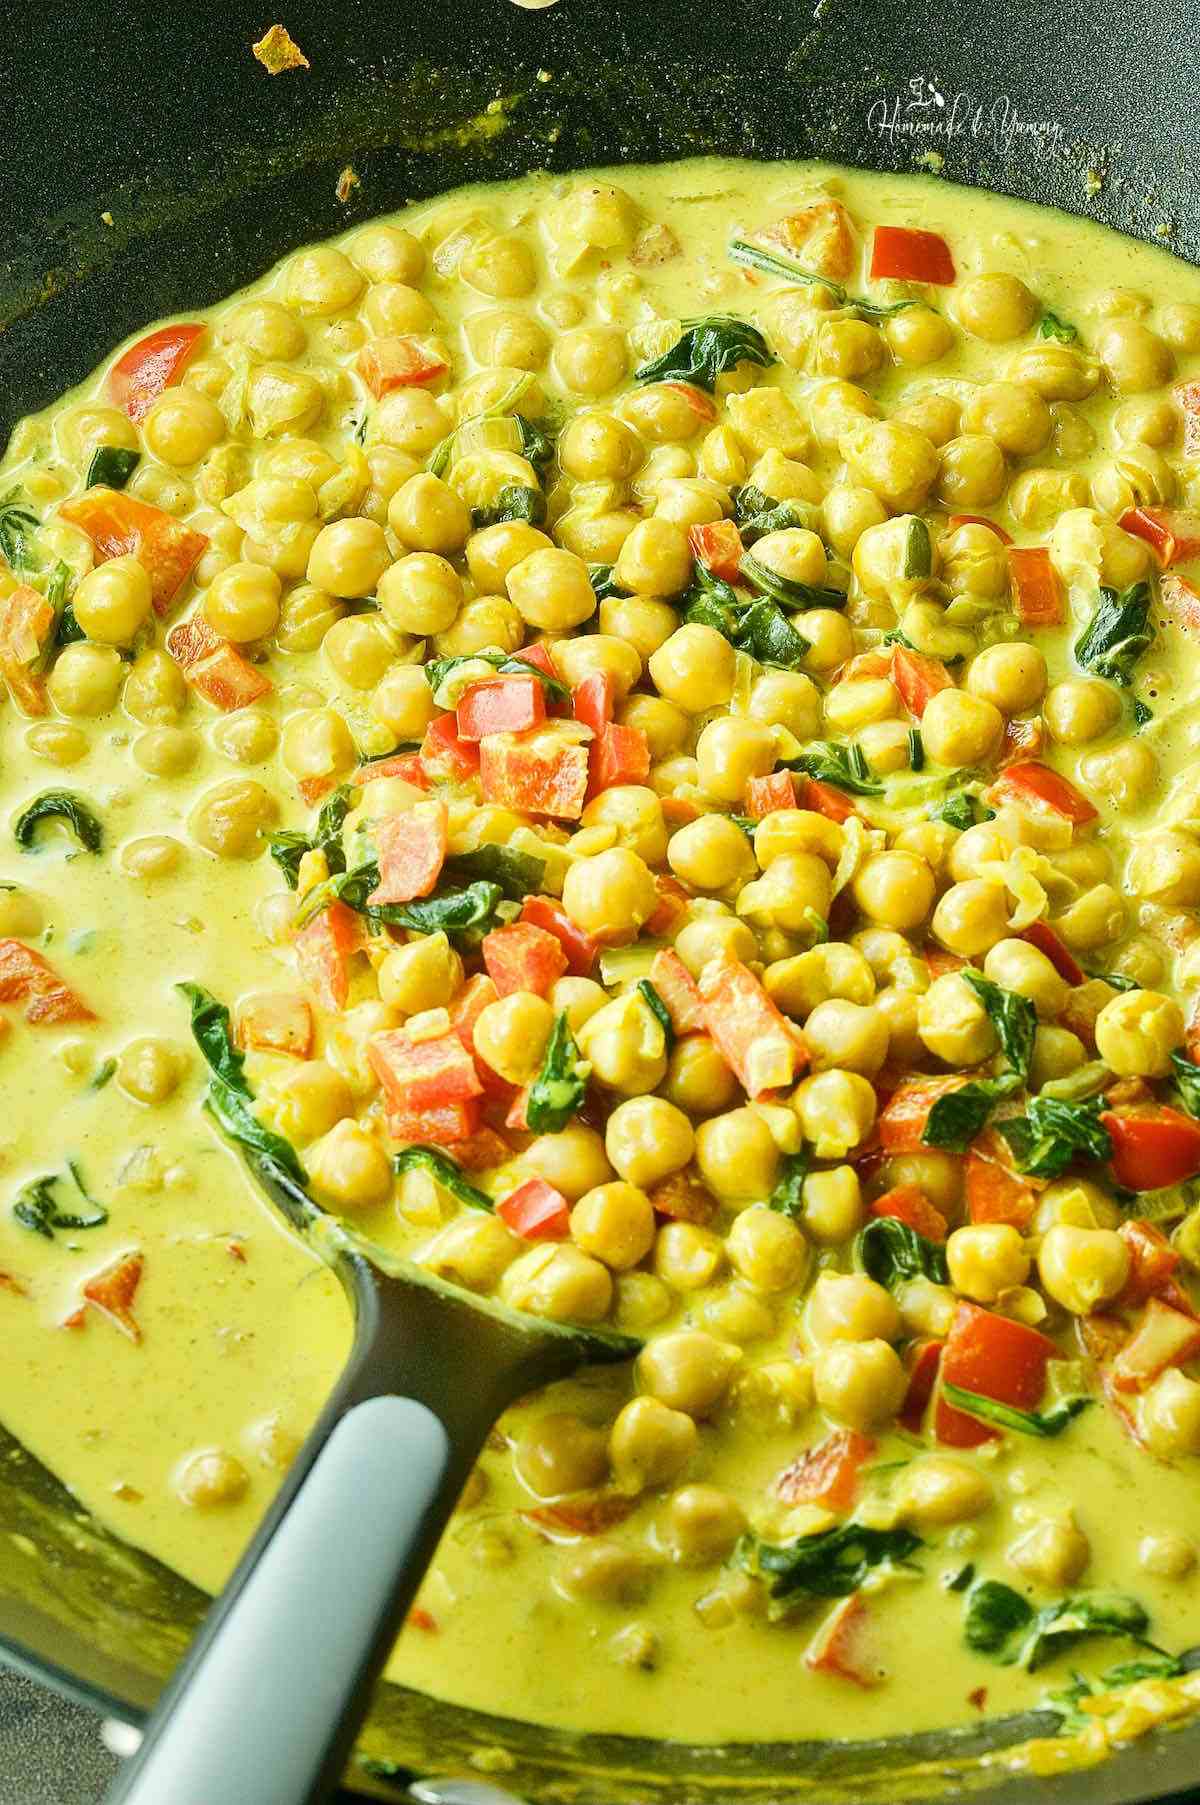 Cooking the chickpea coconut curry.